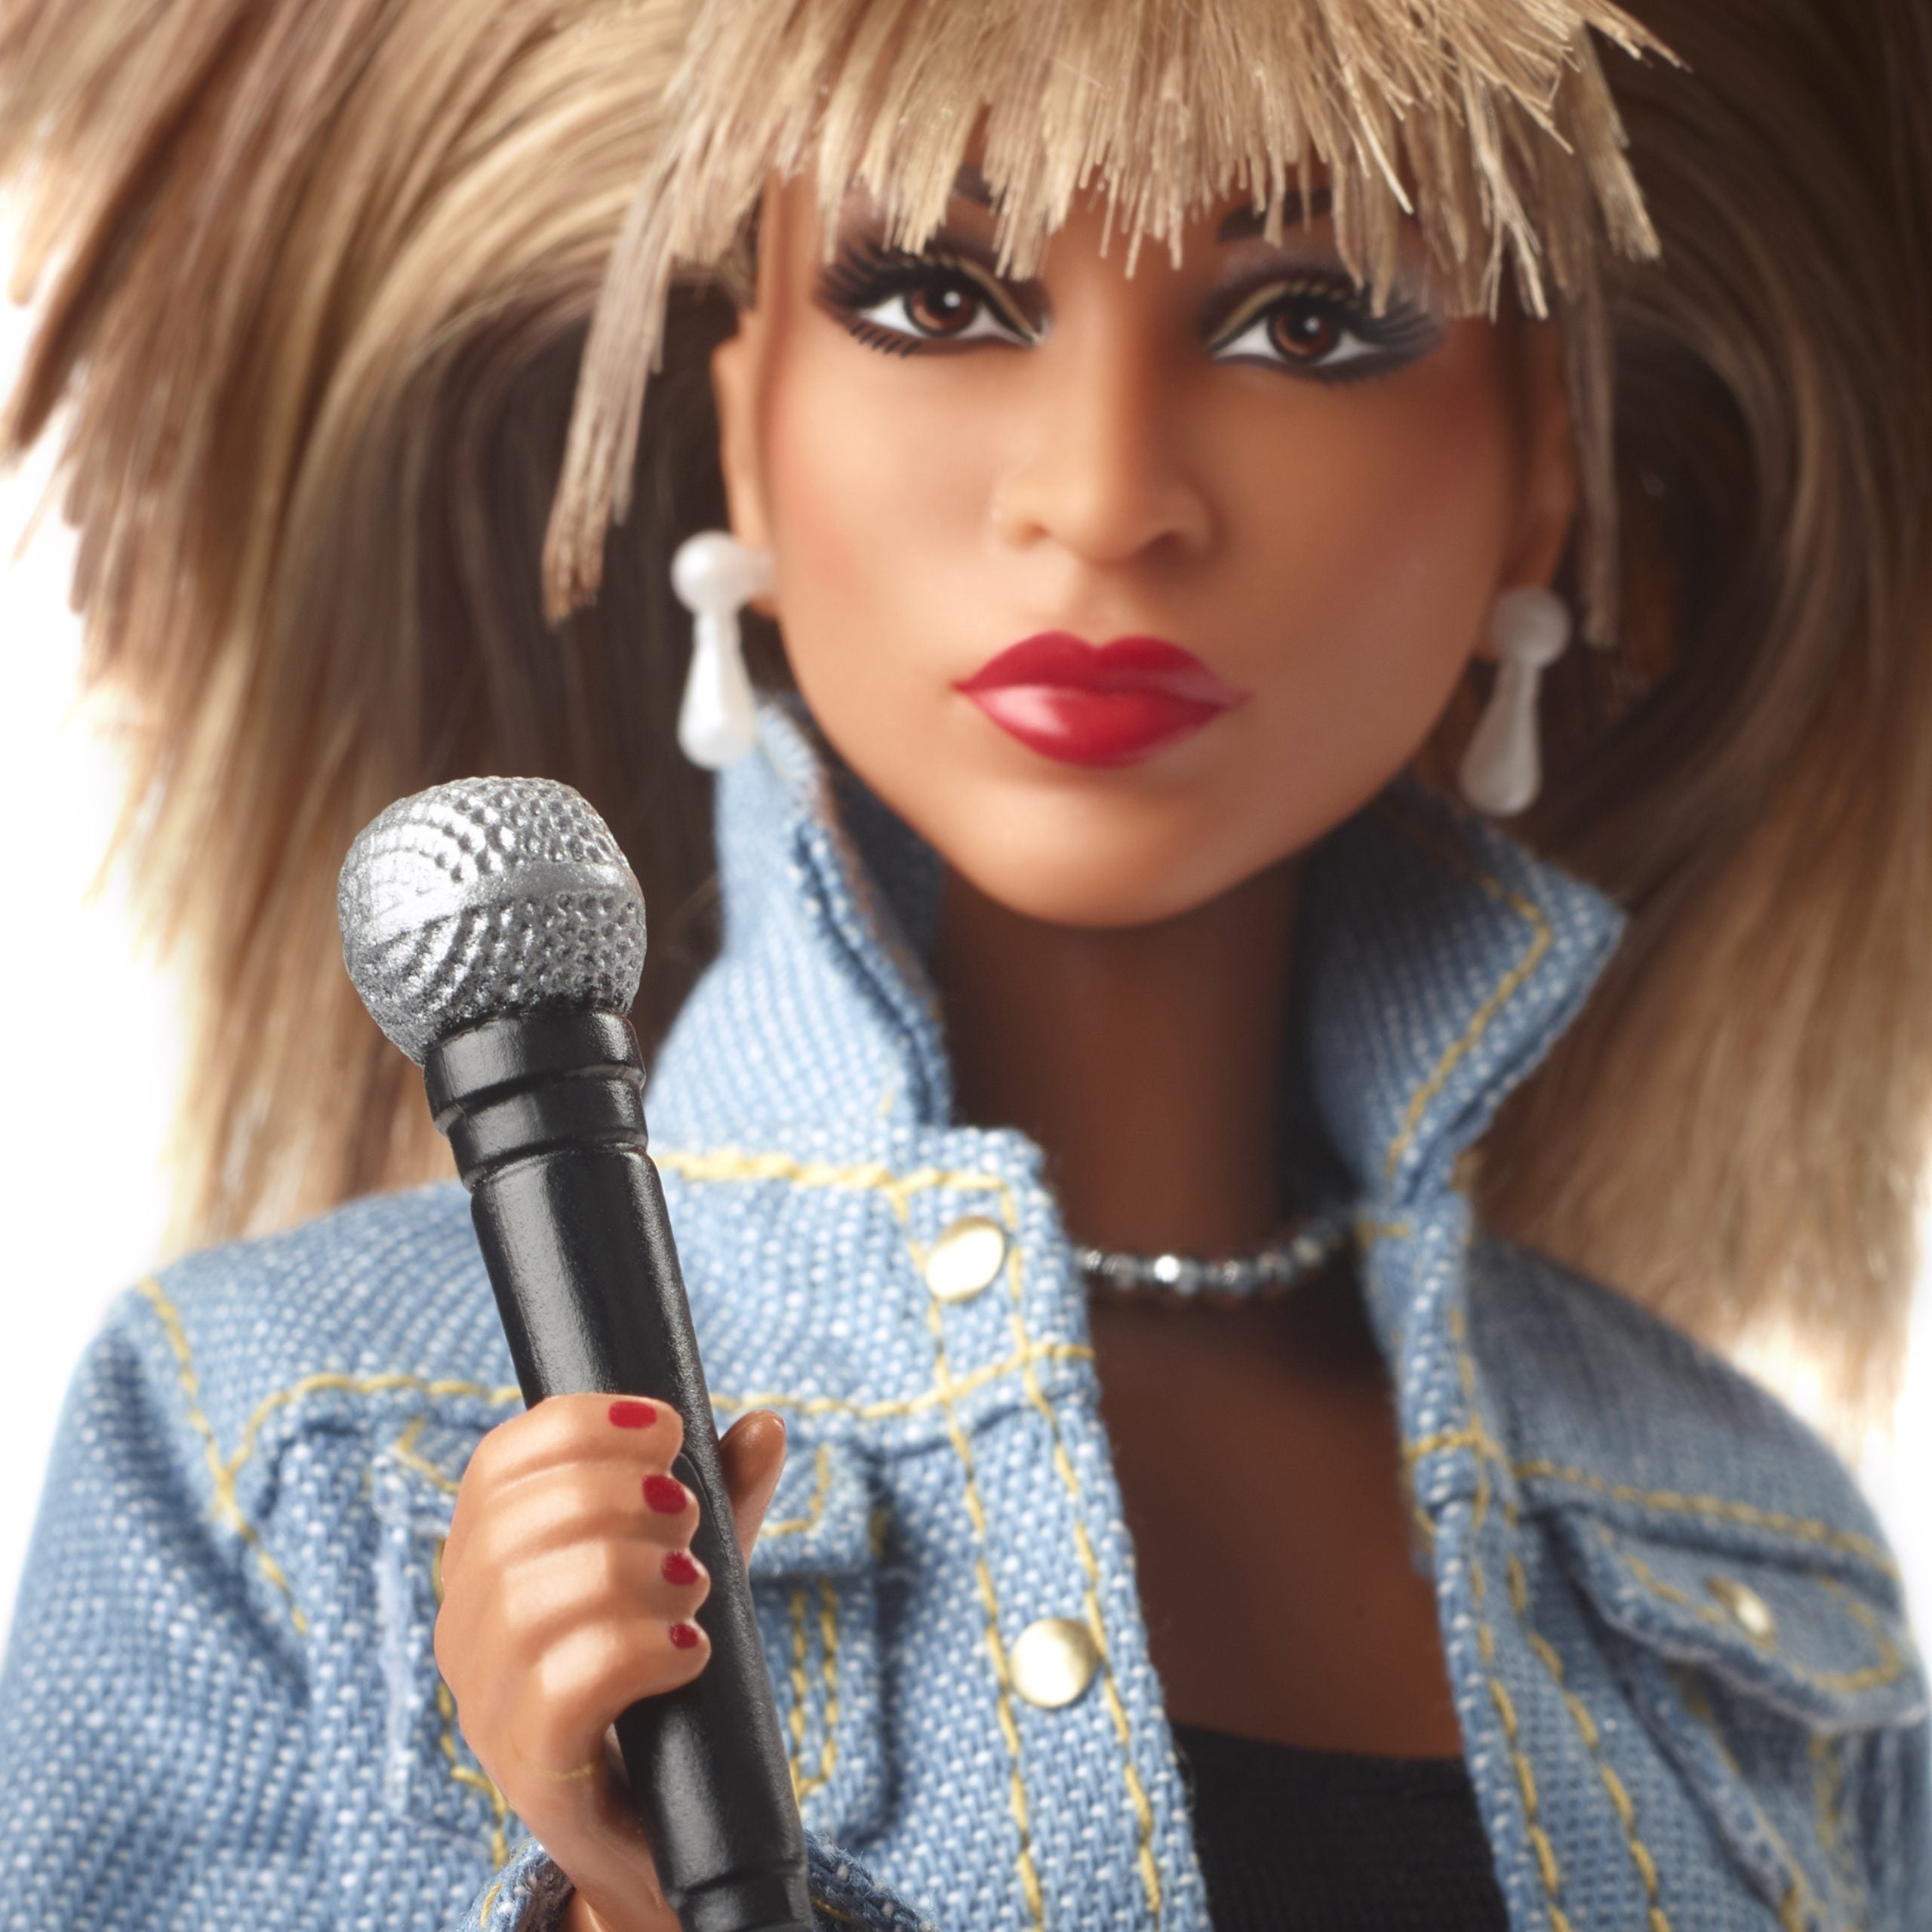 Barbie Releases TinaTurner Doll On The 40th Anniversary Of ‘Whats Love Got To Do With It’